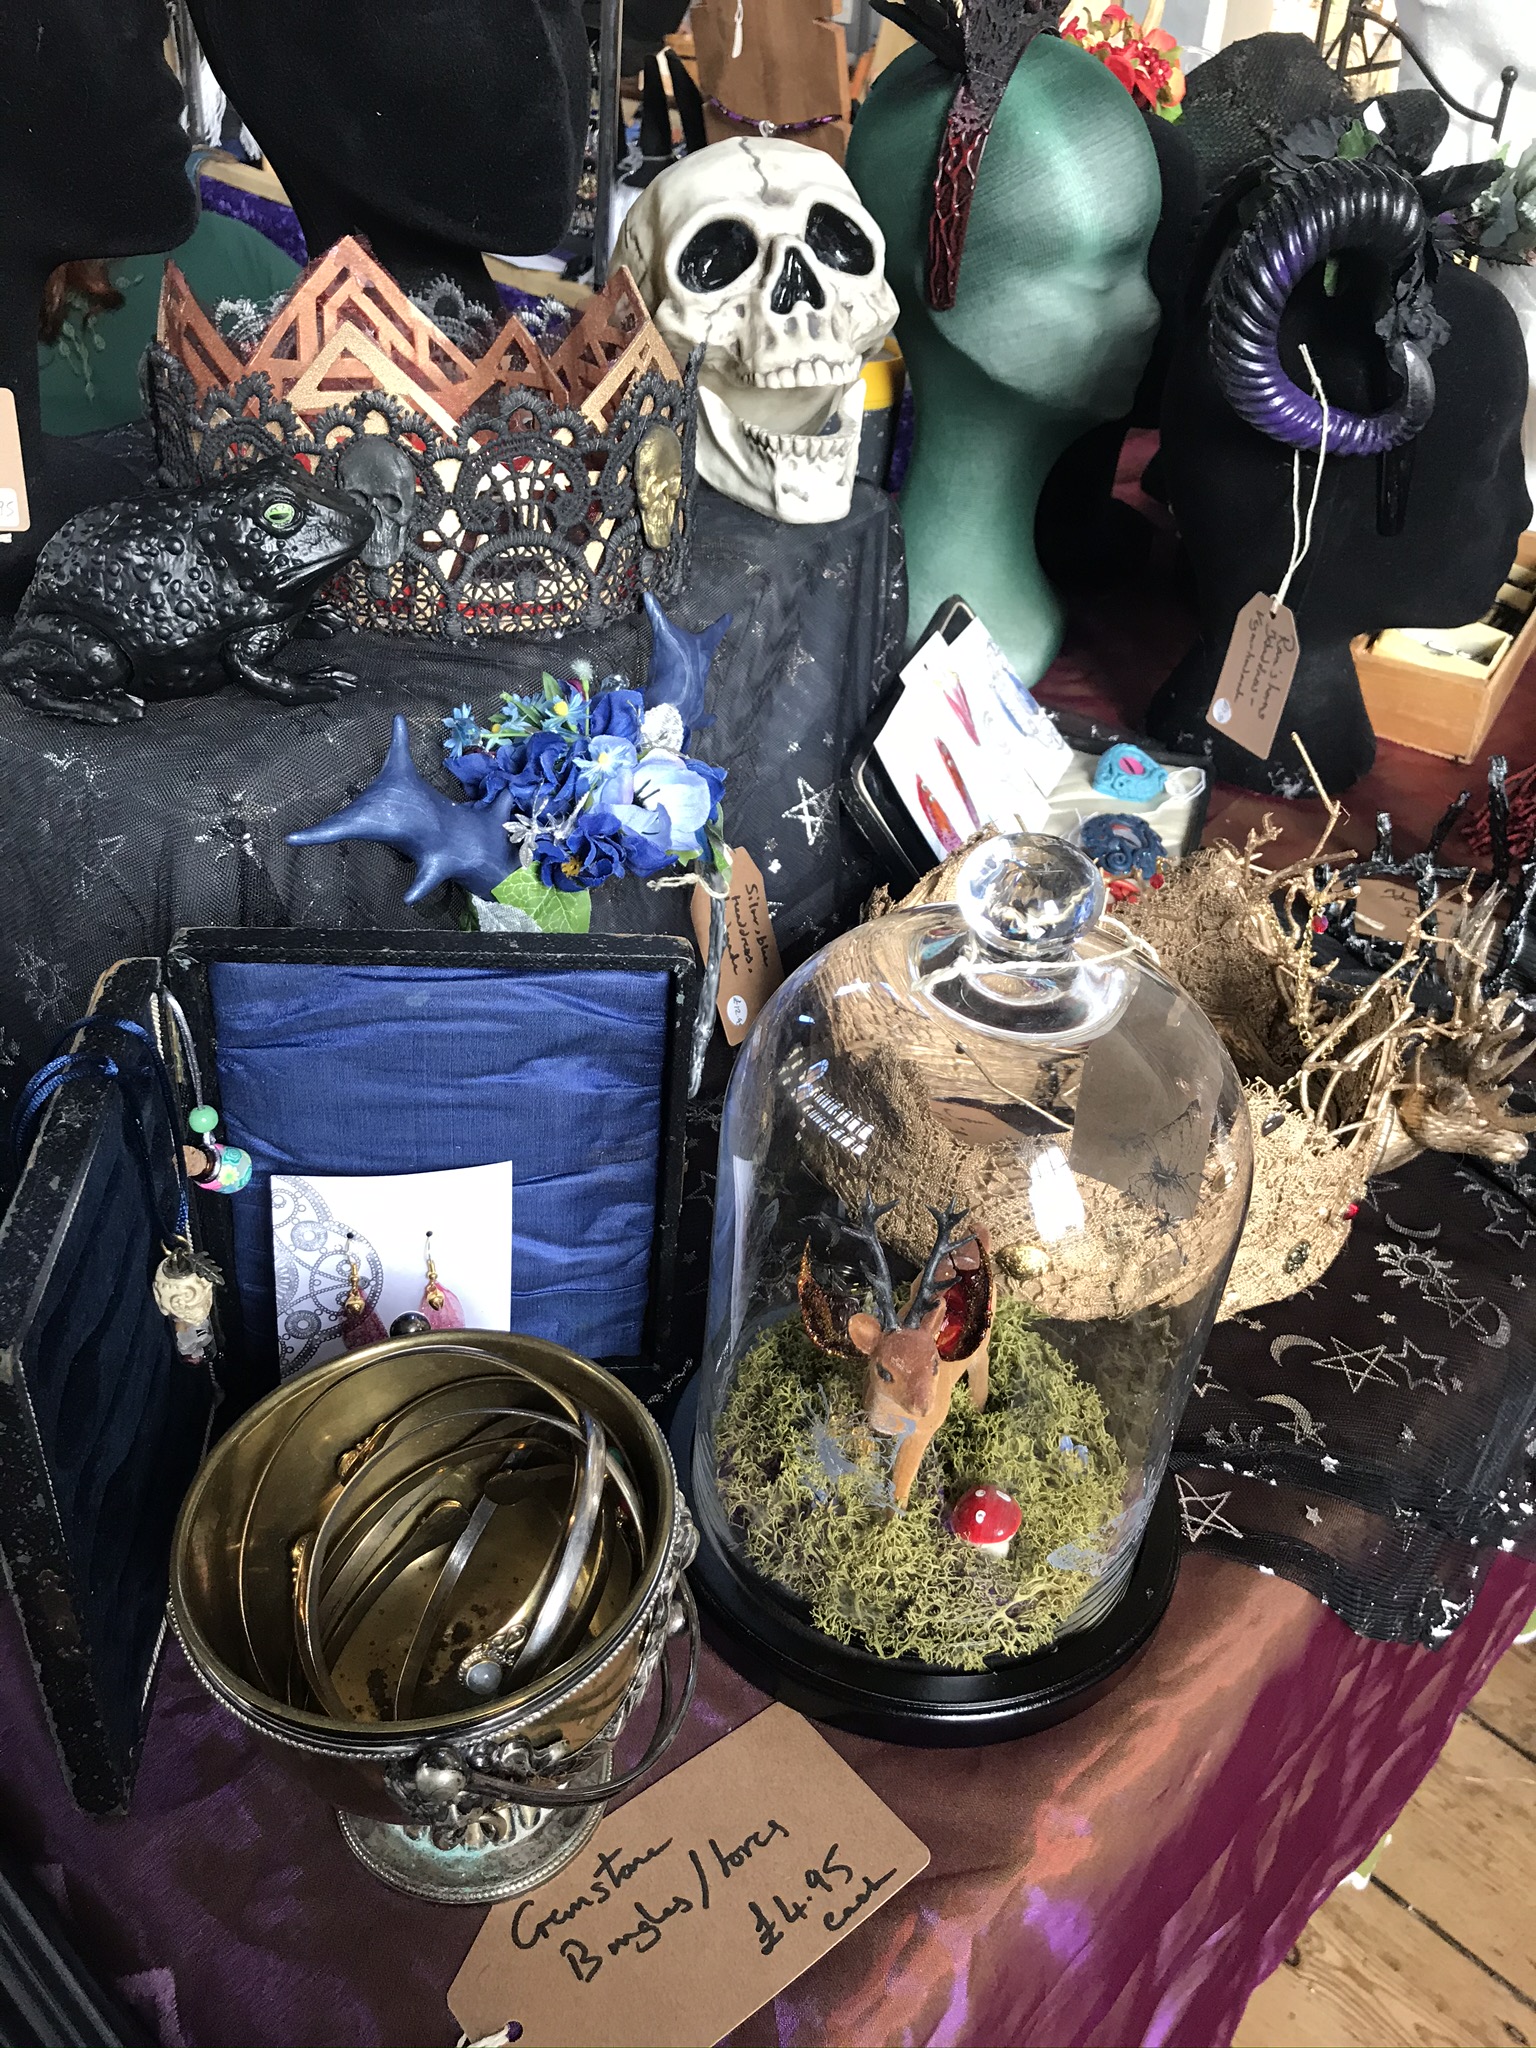 A treasury of goodies: a deer diorama in a bell jar, a brass cauldron of bangles, a resin skull, display head and much more!